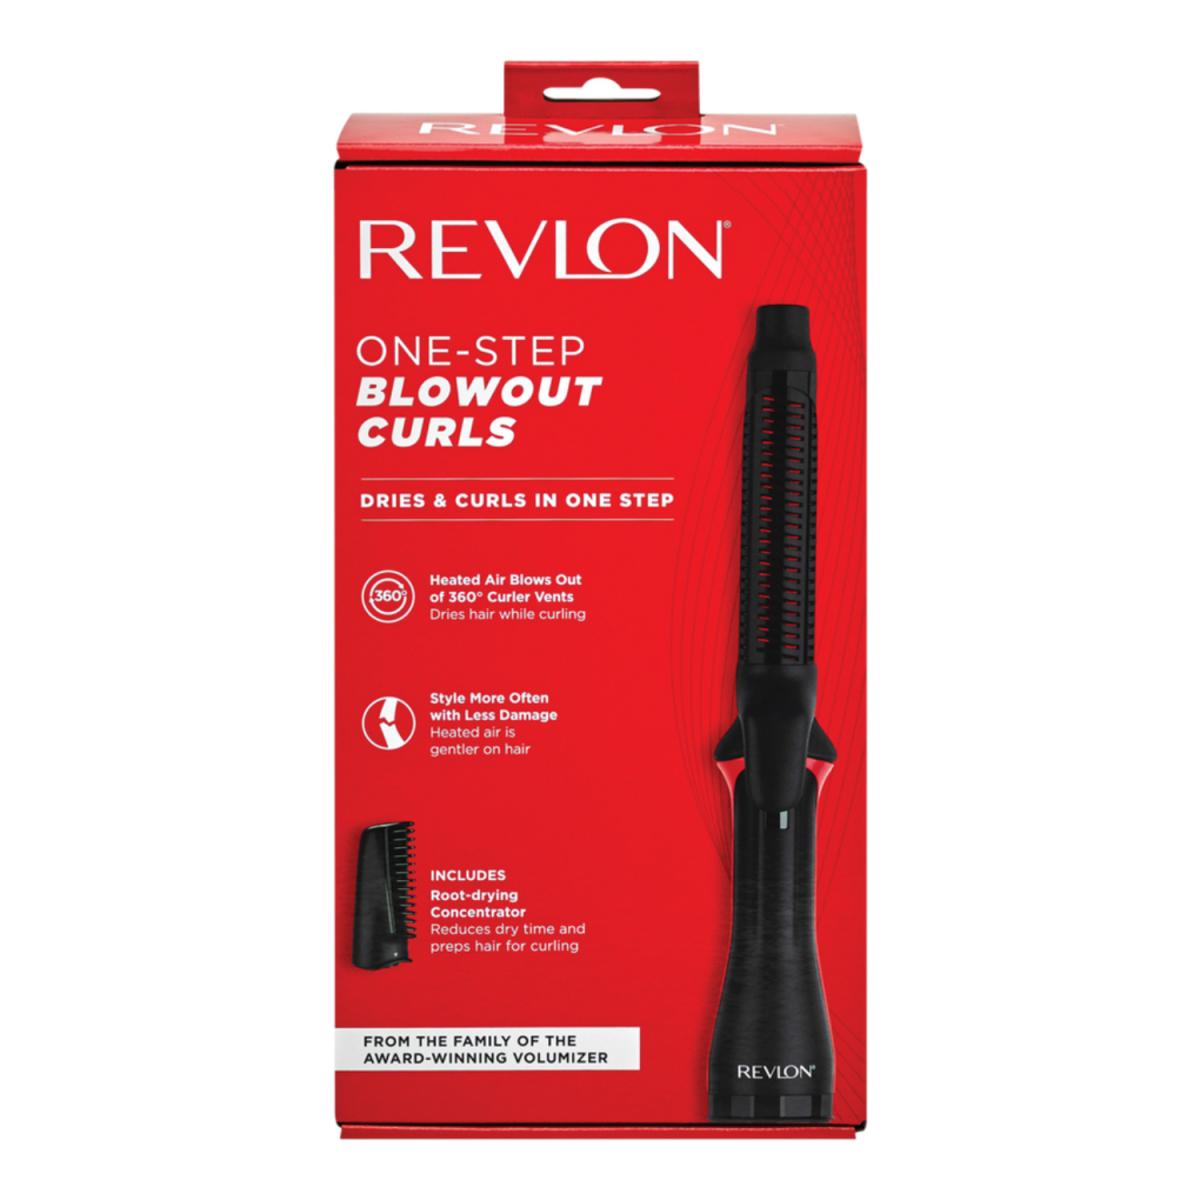 RIZADOR ONE-STEP CURLER BLOWOUT